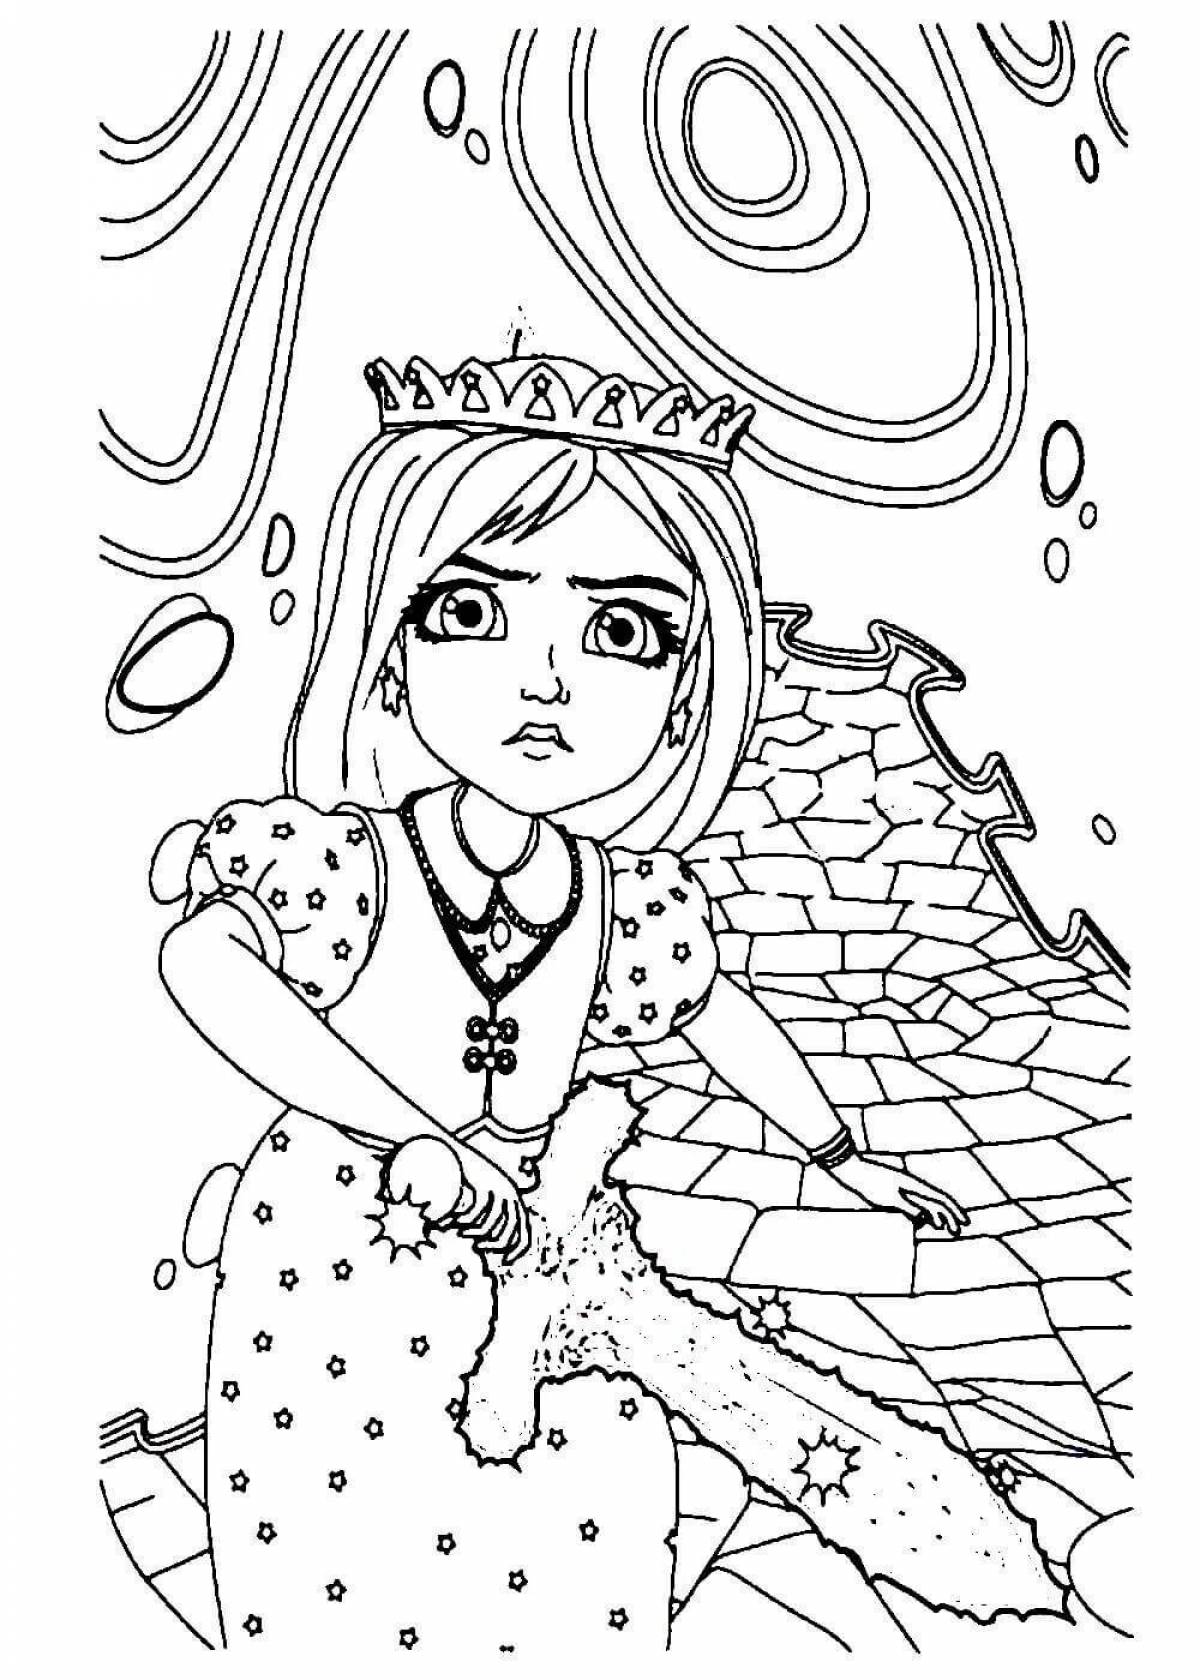 Entertaining princesses are preparing coloring pages